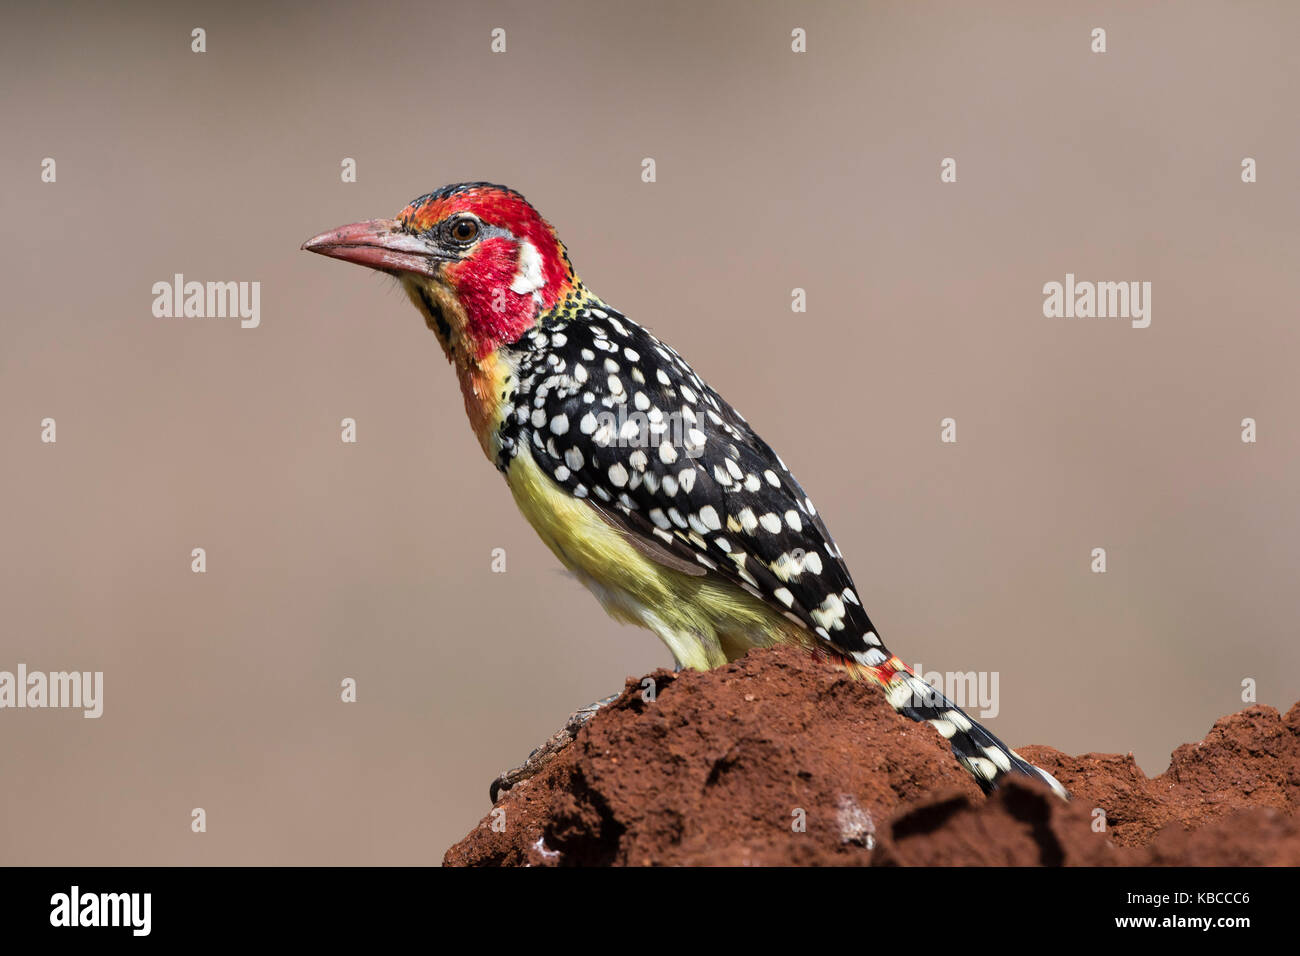 A red-and-yellow barbet (Trachyphonus erythrocephalus), on a termite mound, Kenya, East Africa, Africa Stock Photo